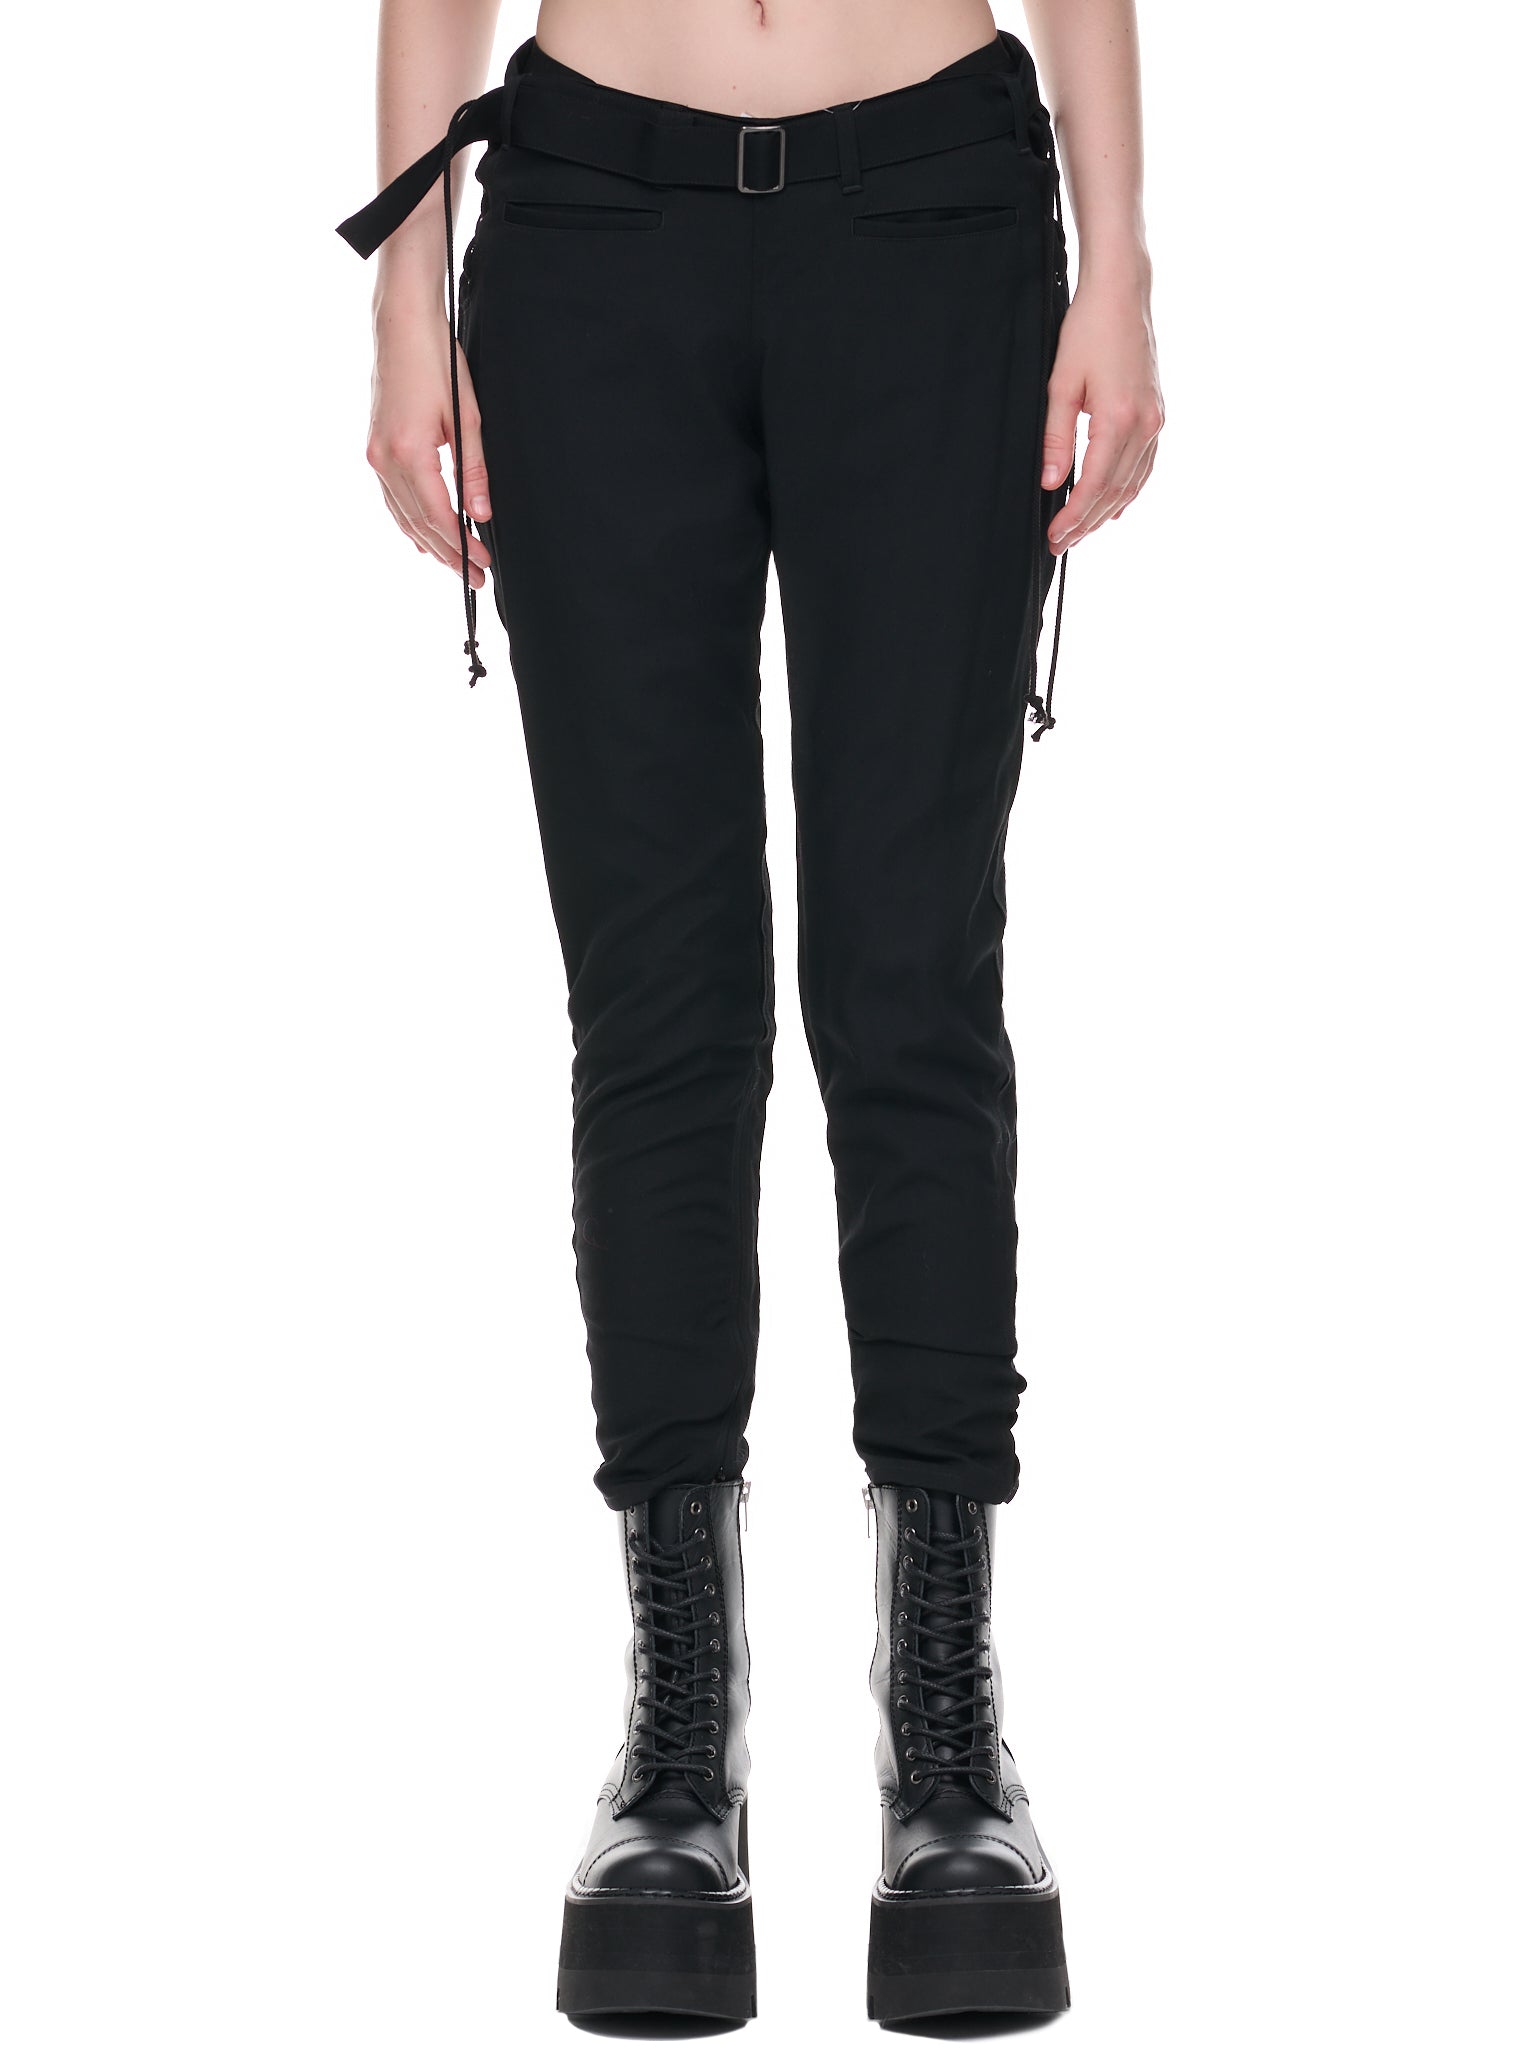 Lace-Up Trousers (FE-P10-100-1-BLACK)